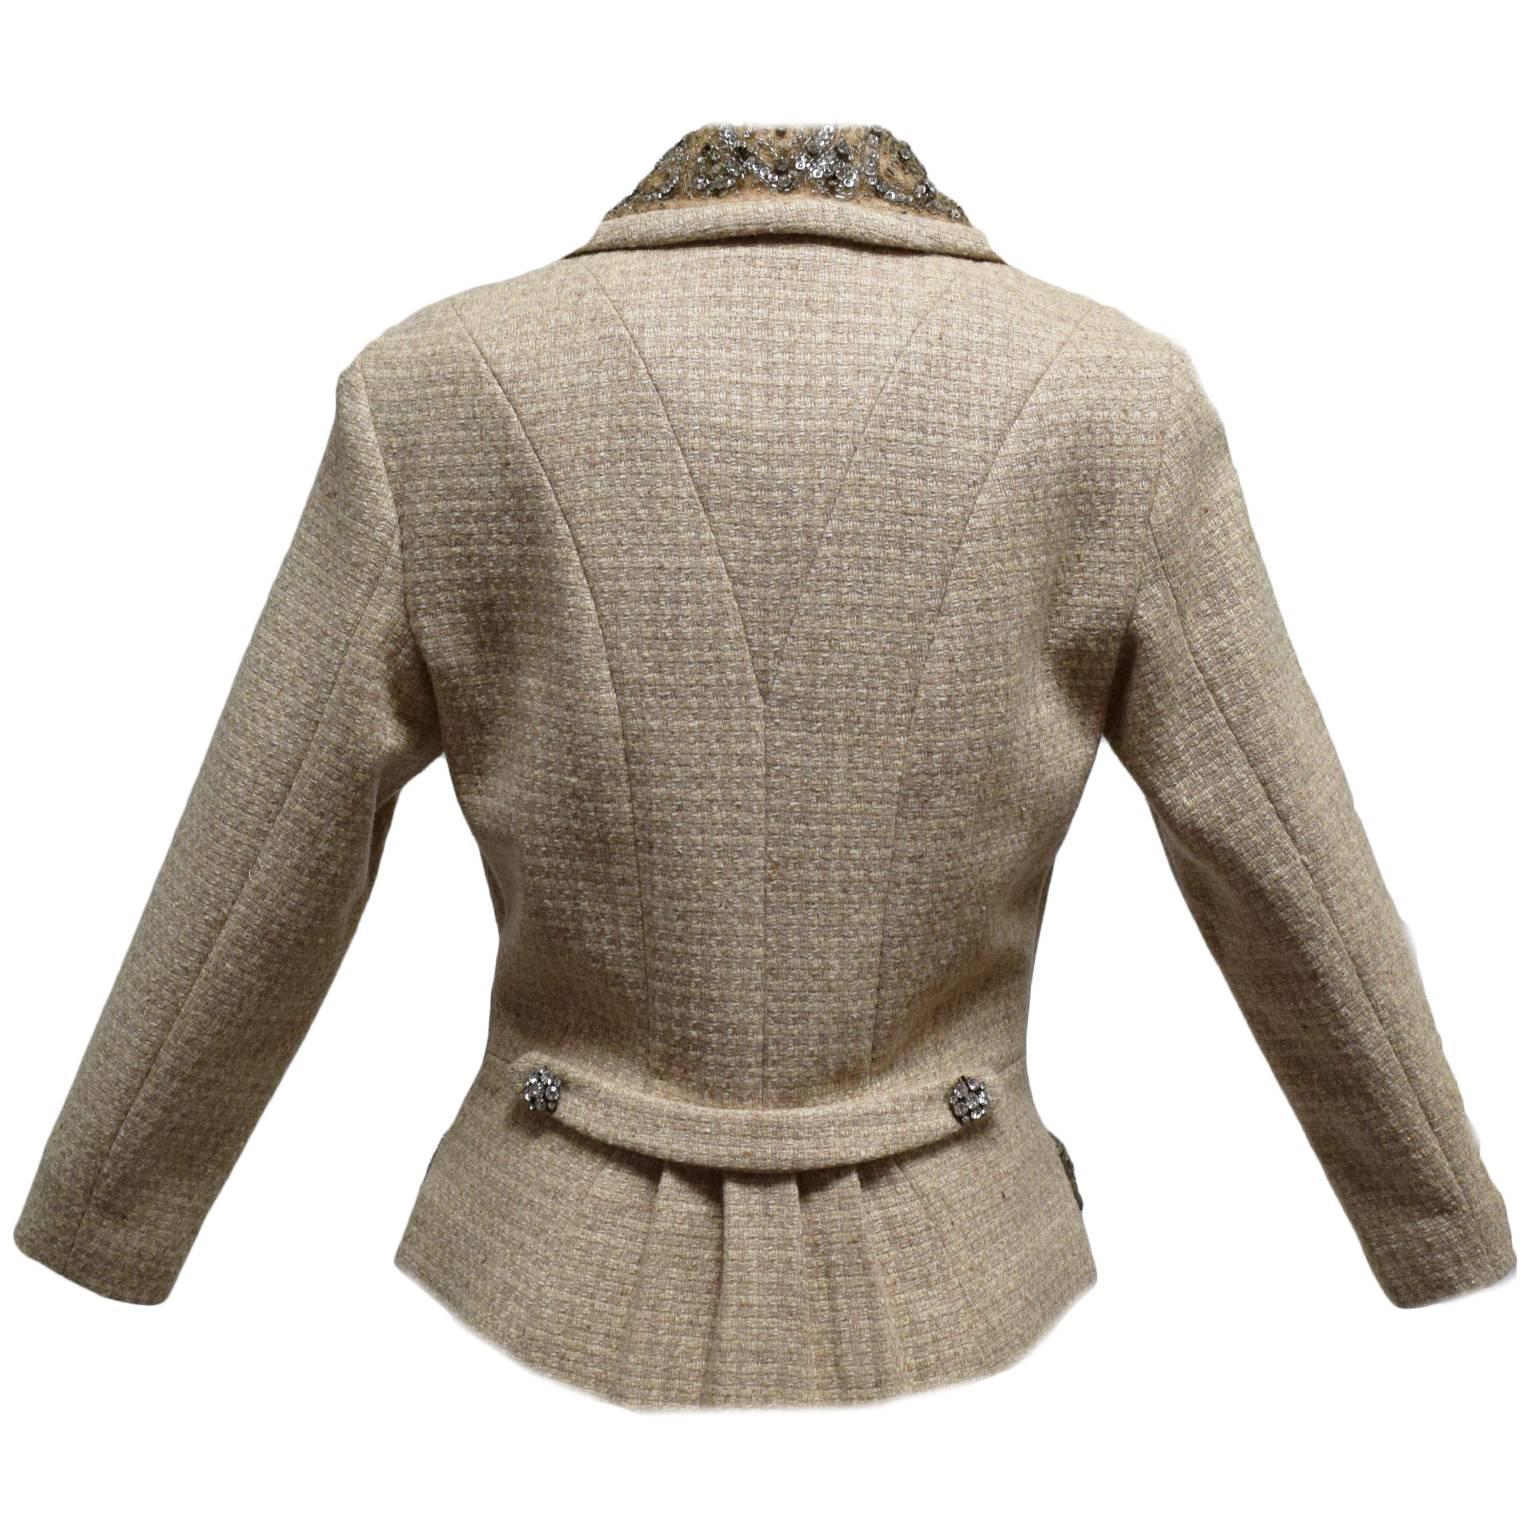 This Tracy Reese jacket is made of 100% beige wool. The jacket is fully lined in silk and has crystal brooch like button closures. The pockets, collar, and sleeve ends are incased in lace, seed glass beading, and crystals for an elegant contrast. 